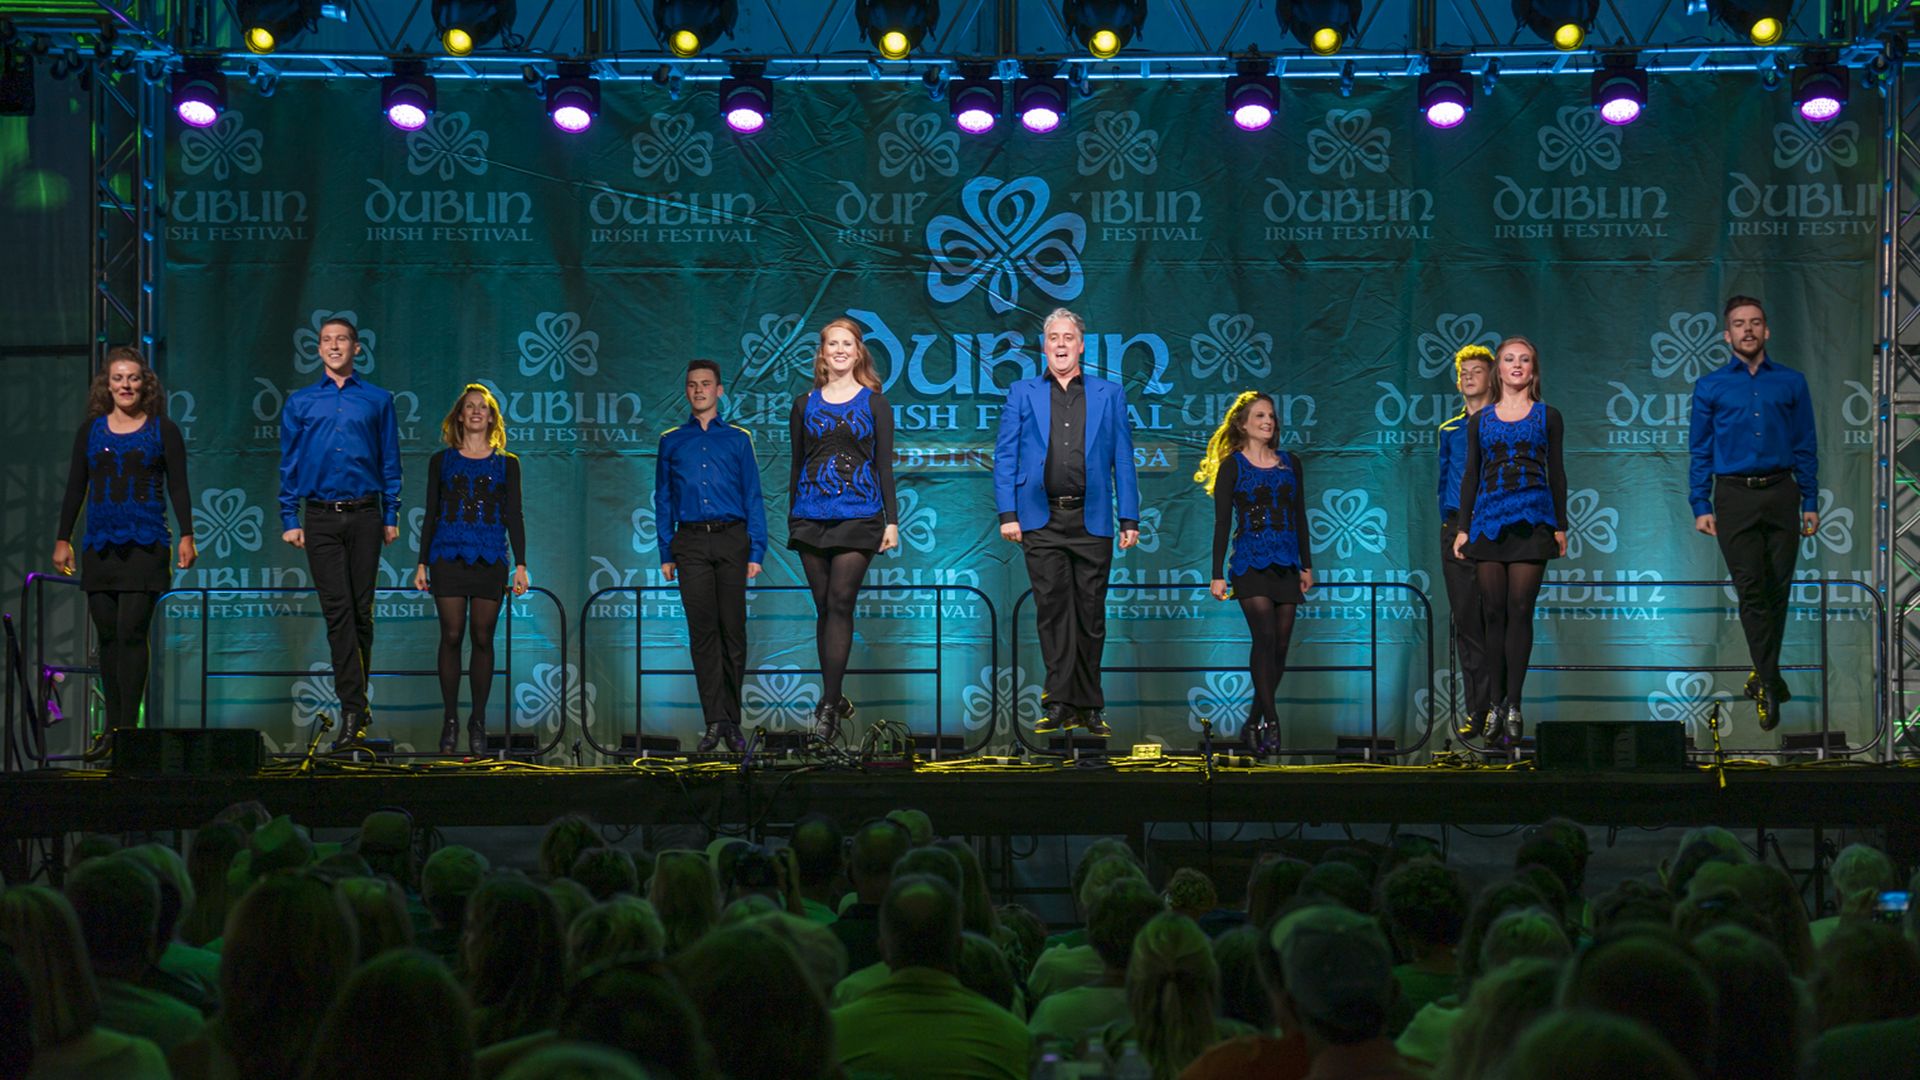 Celtic dancers lined up on a Dublin Irish Festival stage in front of a large crowd